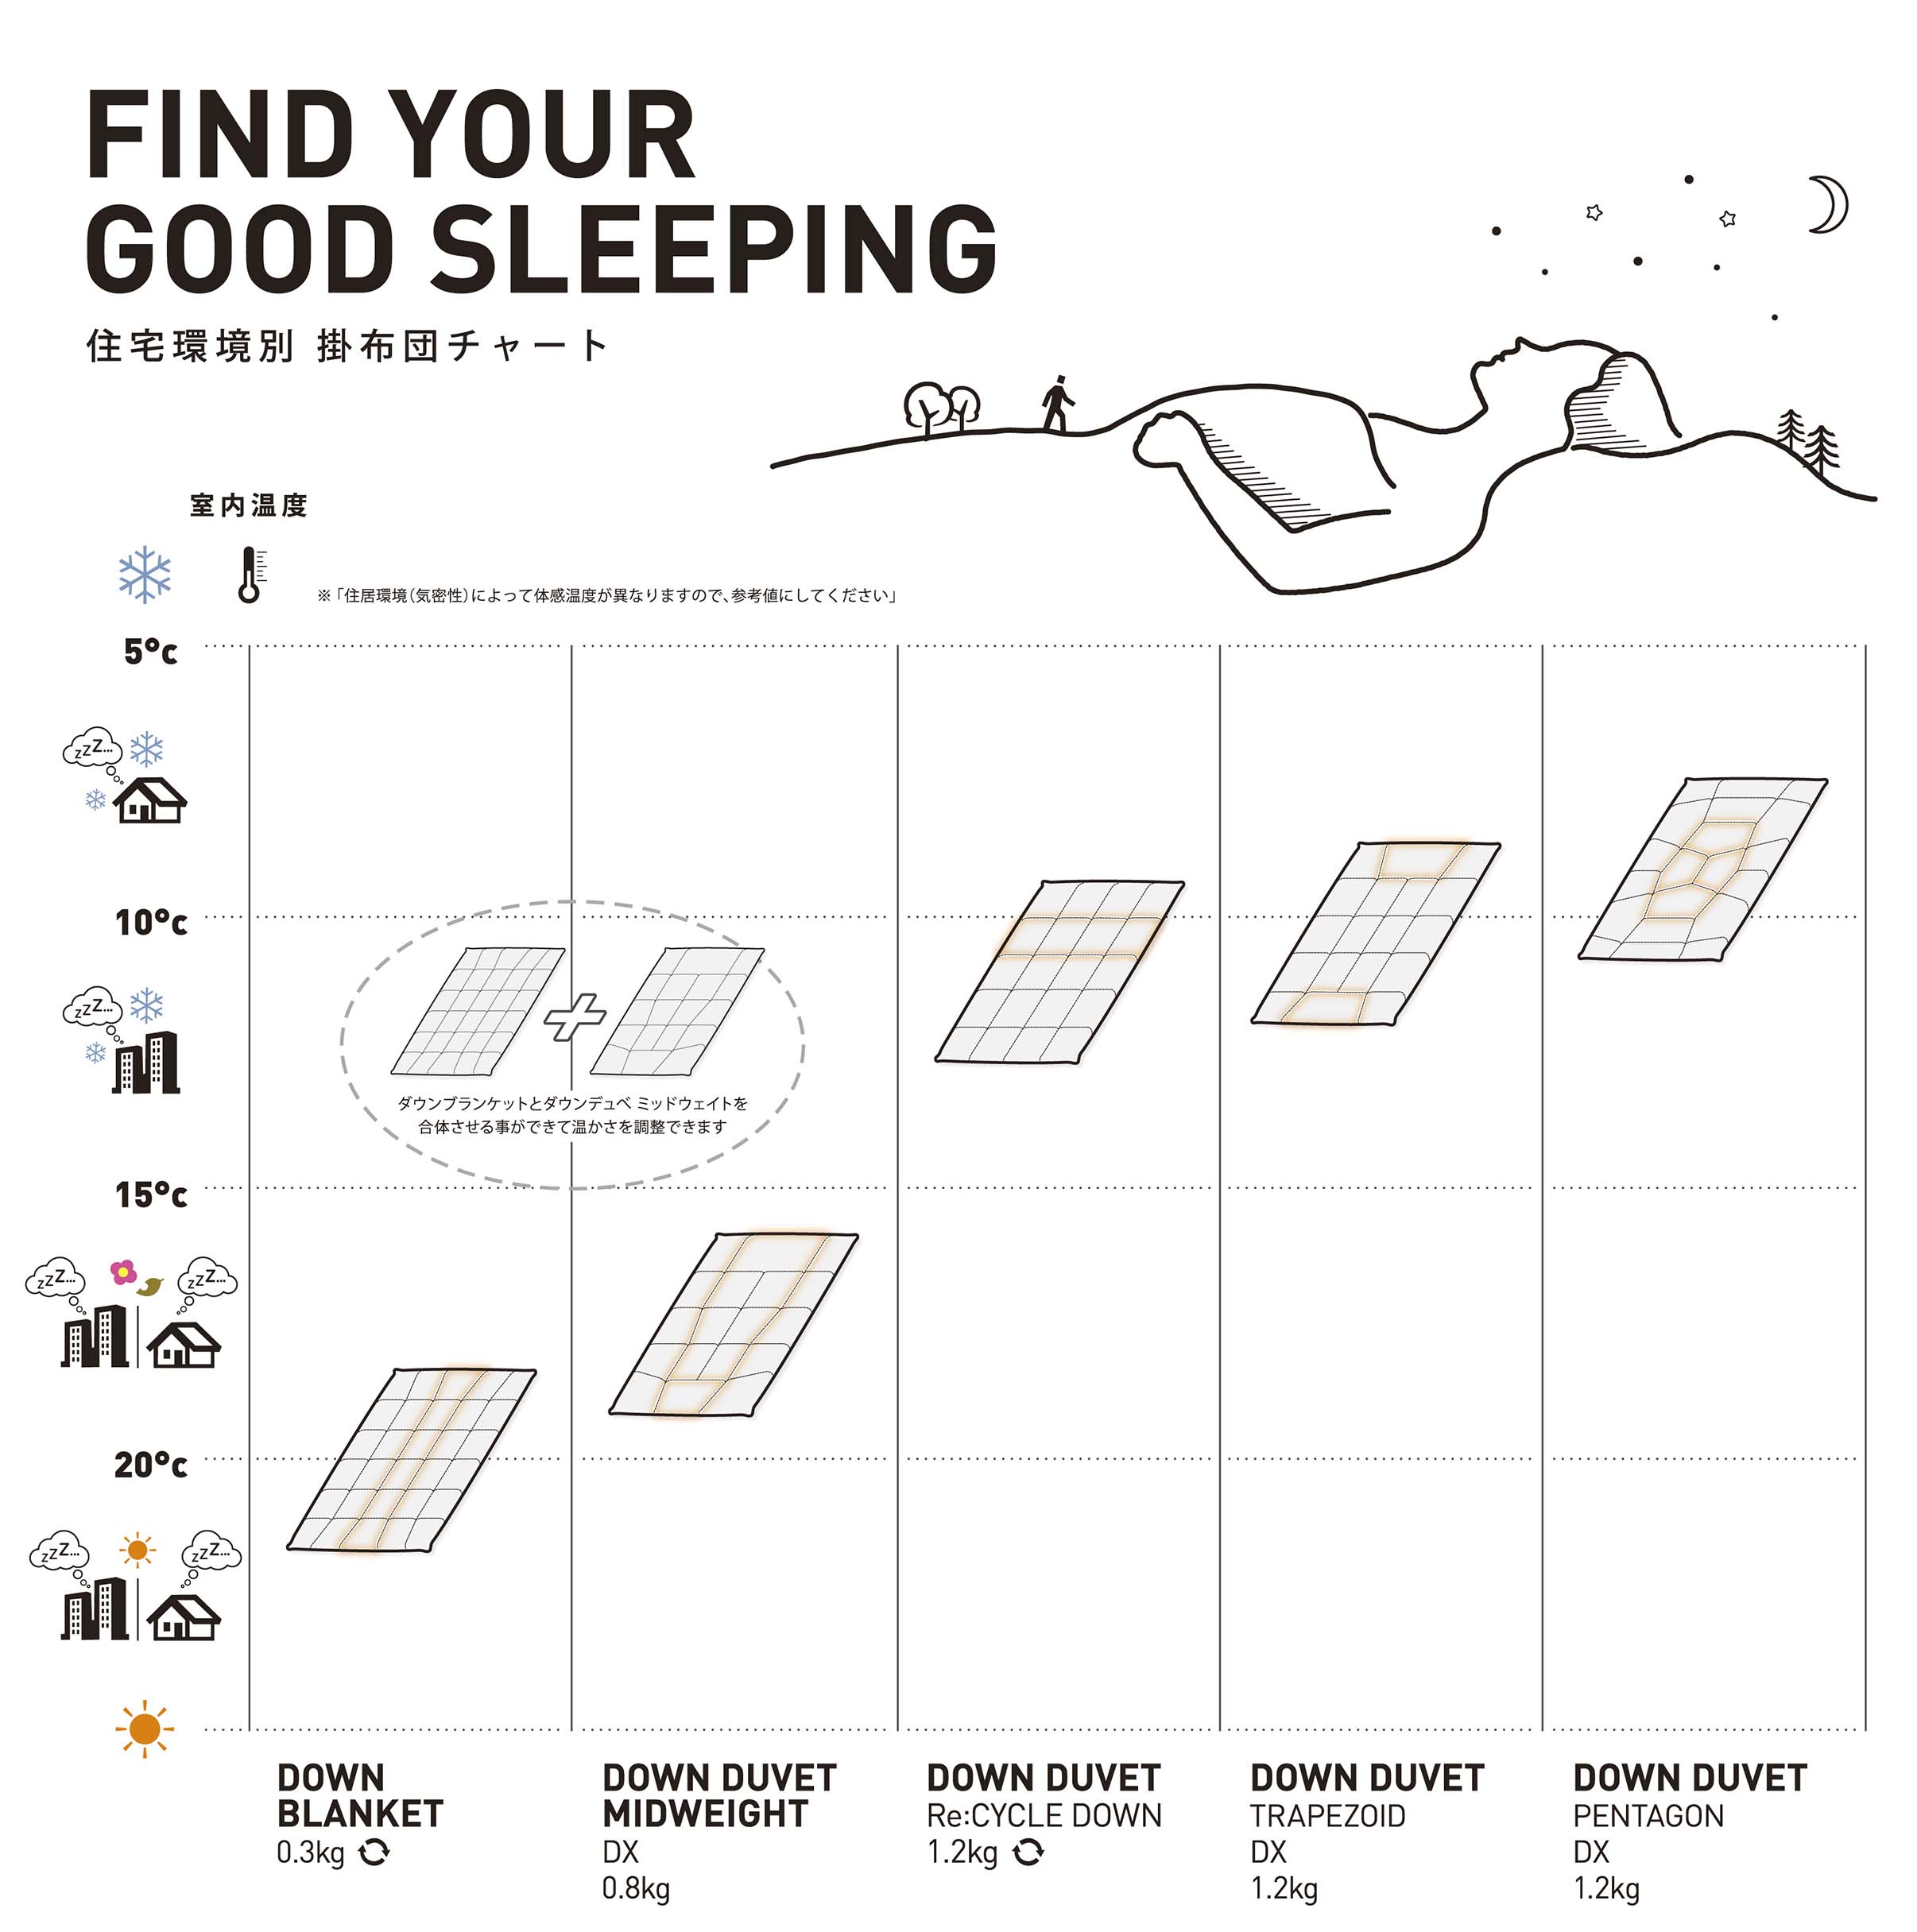 FIND YOUR GOOD SLEEPING